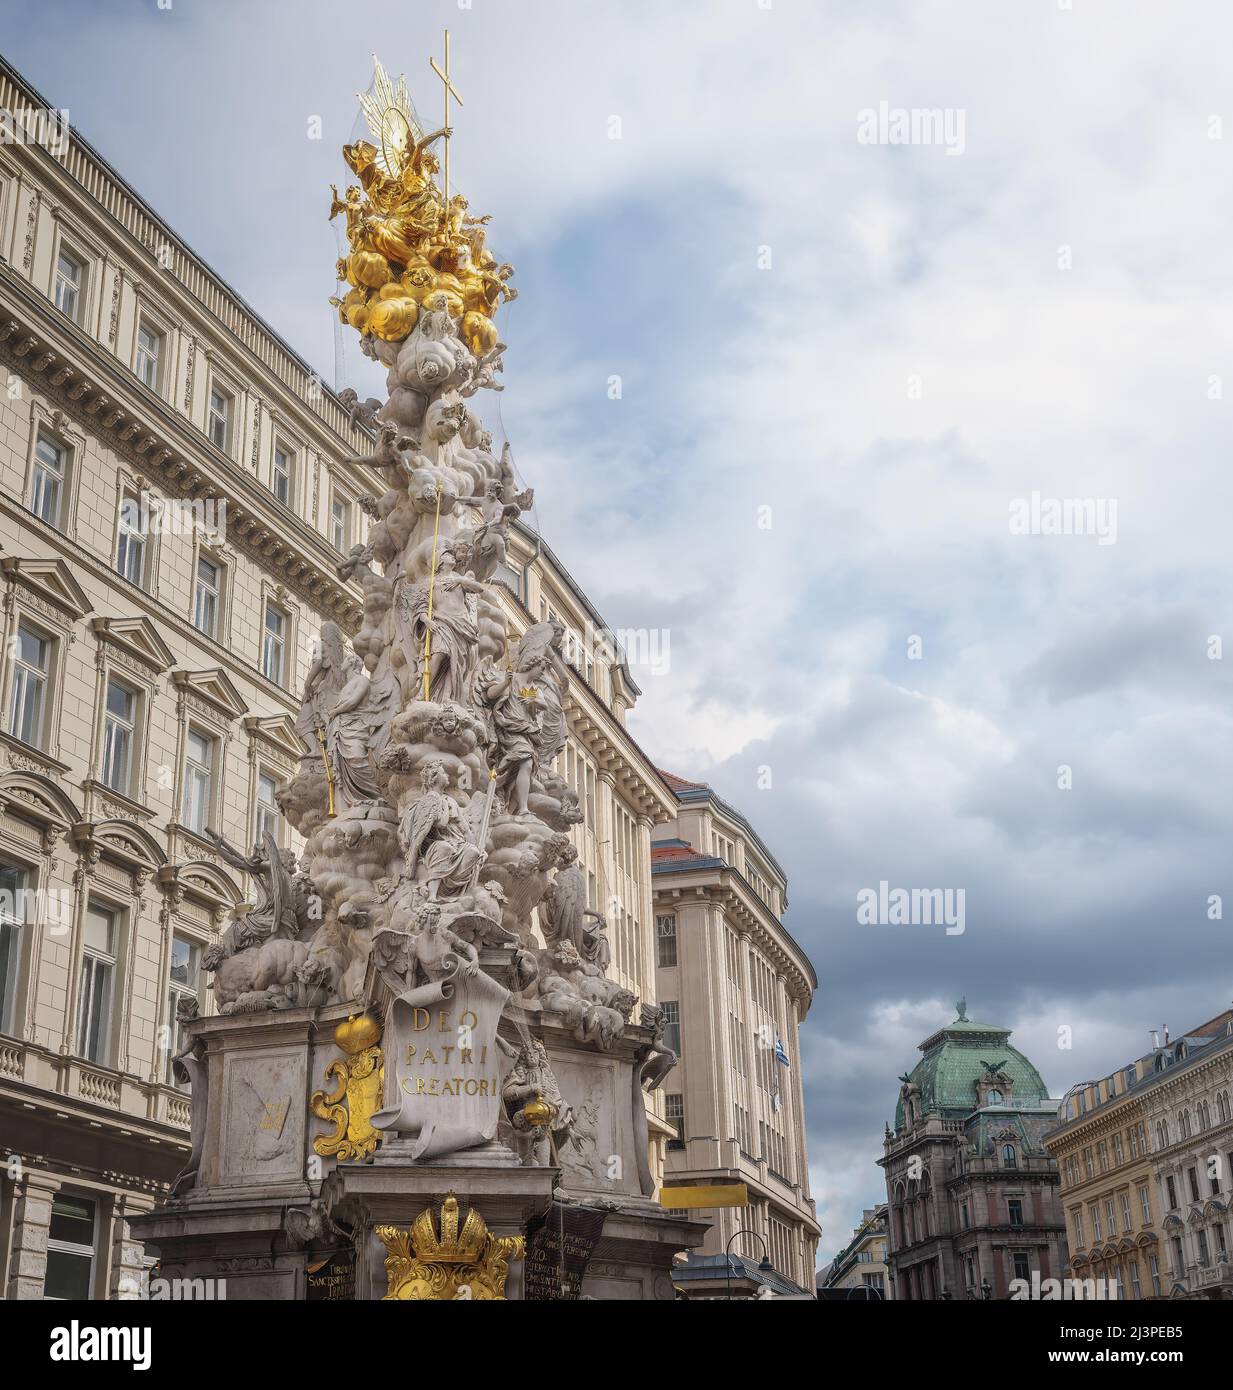 Plague Column at Graben Street - monument inaugurated in 1694 and designed by various artists - Vienna, Austria Stock Photo